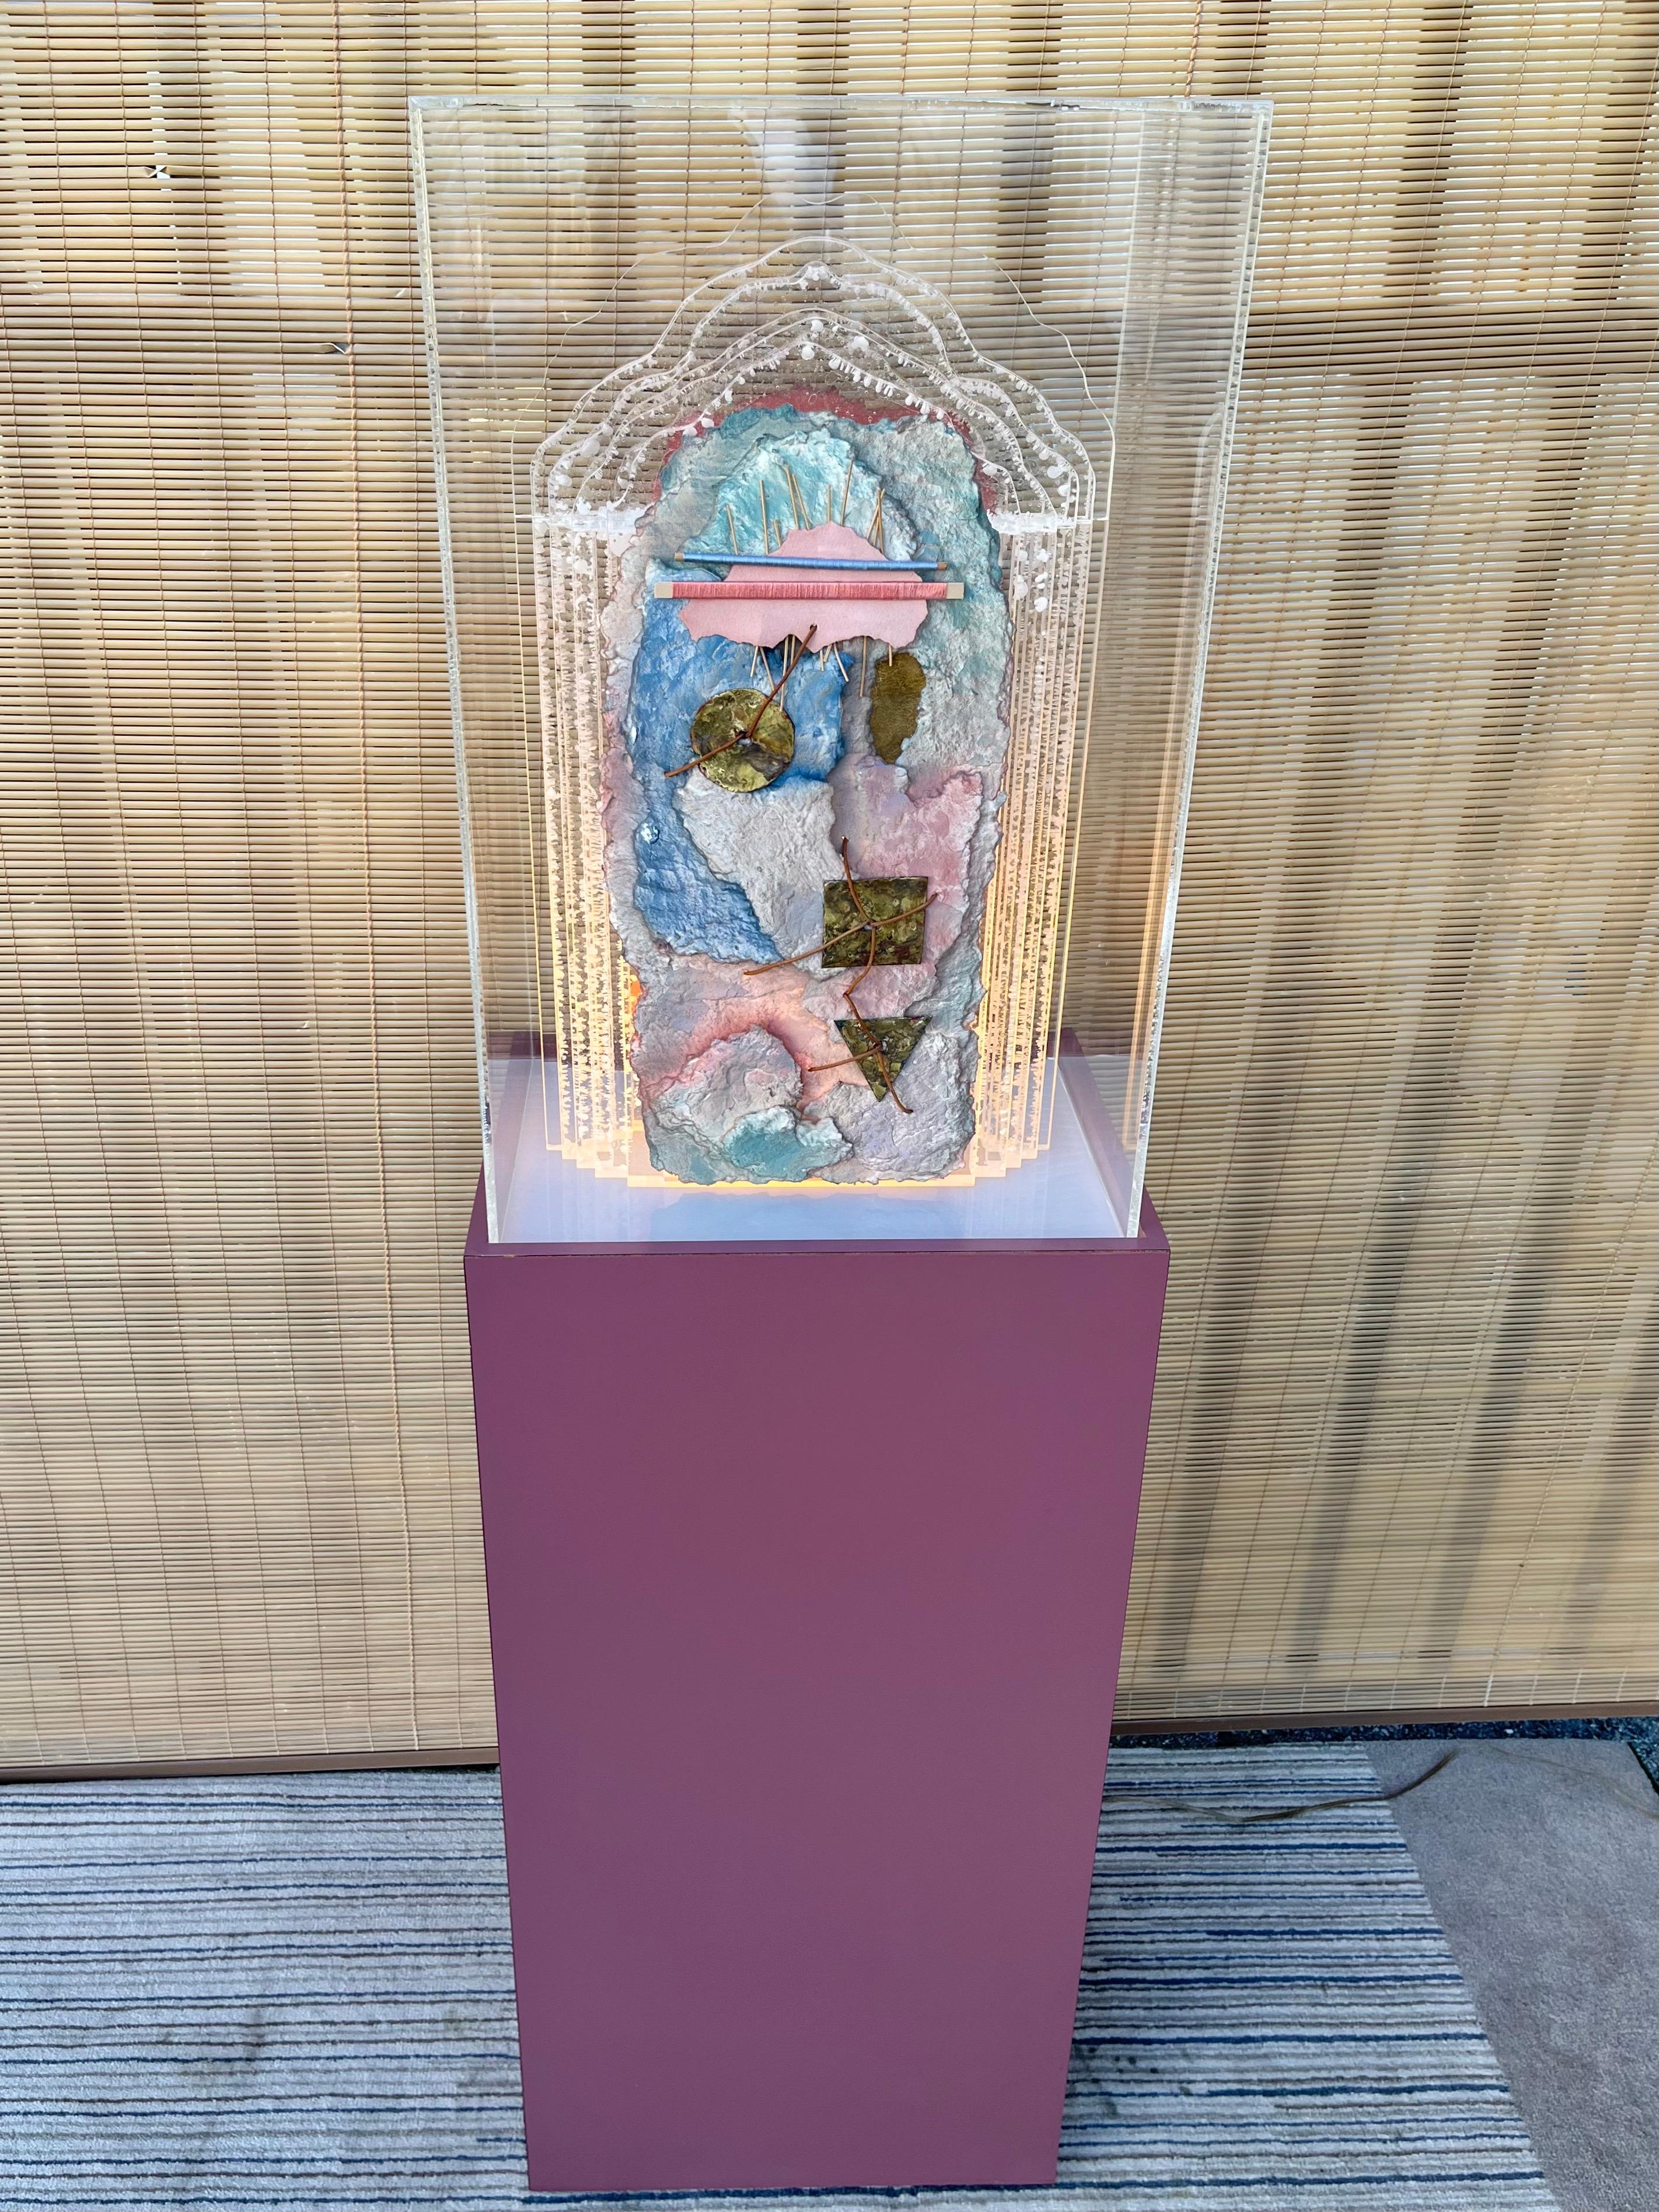 Large Postmodern Lucite and Mixed Media Light Sculpture With Pedestal and a Box Acrylic Cover. Circa 1980s. 
Features an abstract Southwestern inspired mixed-media appliqué on pastel colors, textiles, paper, and brass, over a multilayered lucite